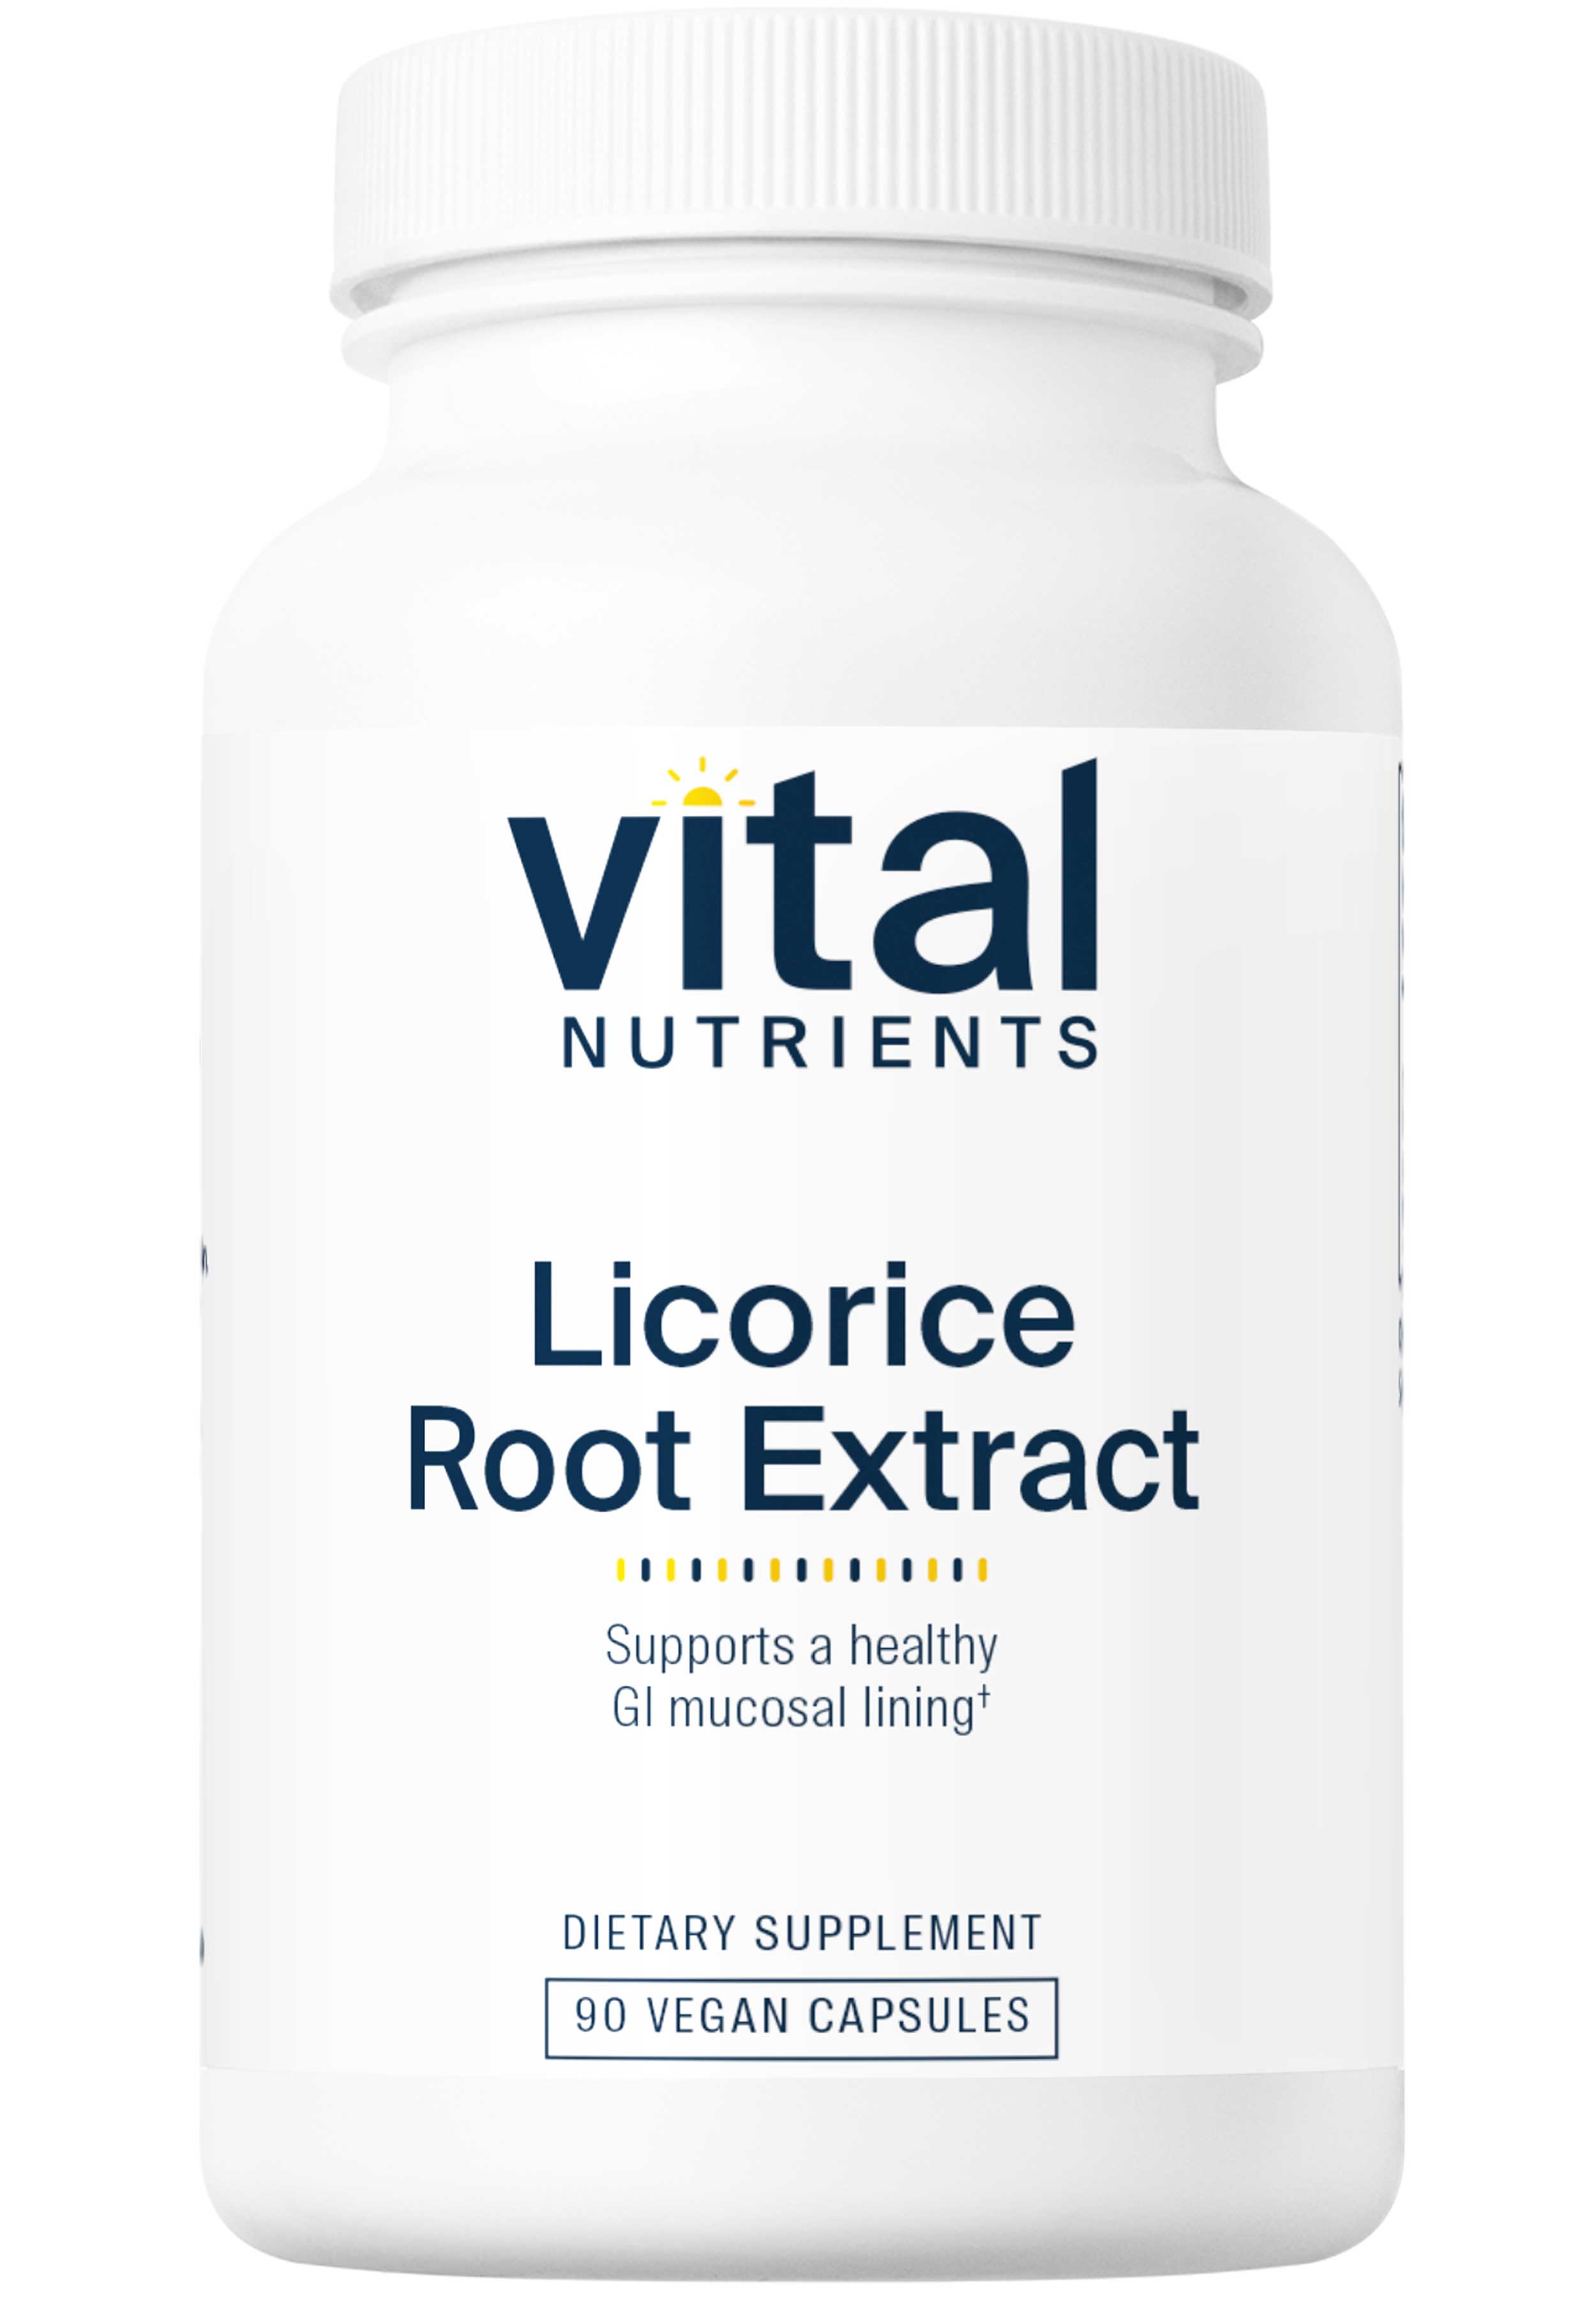 Vital Nutrients Licorice Root Extract 400mg